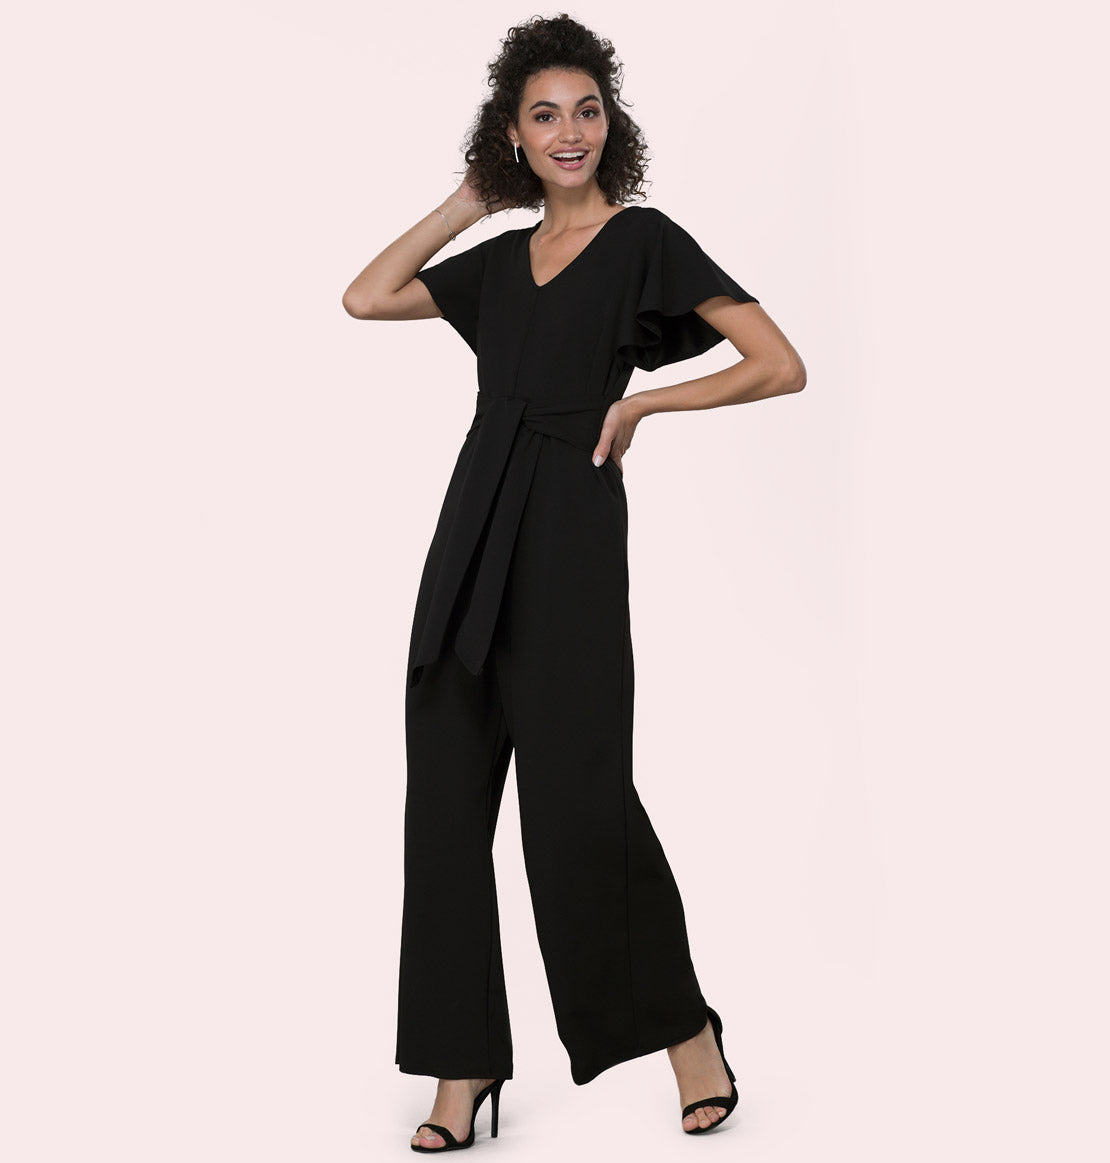 How to Pick Flattering Jumpsuits for Any Body Types